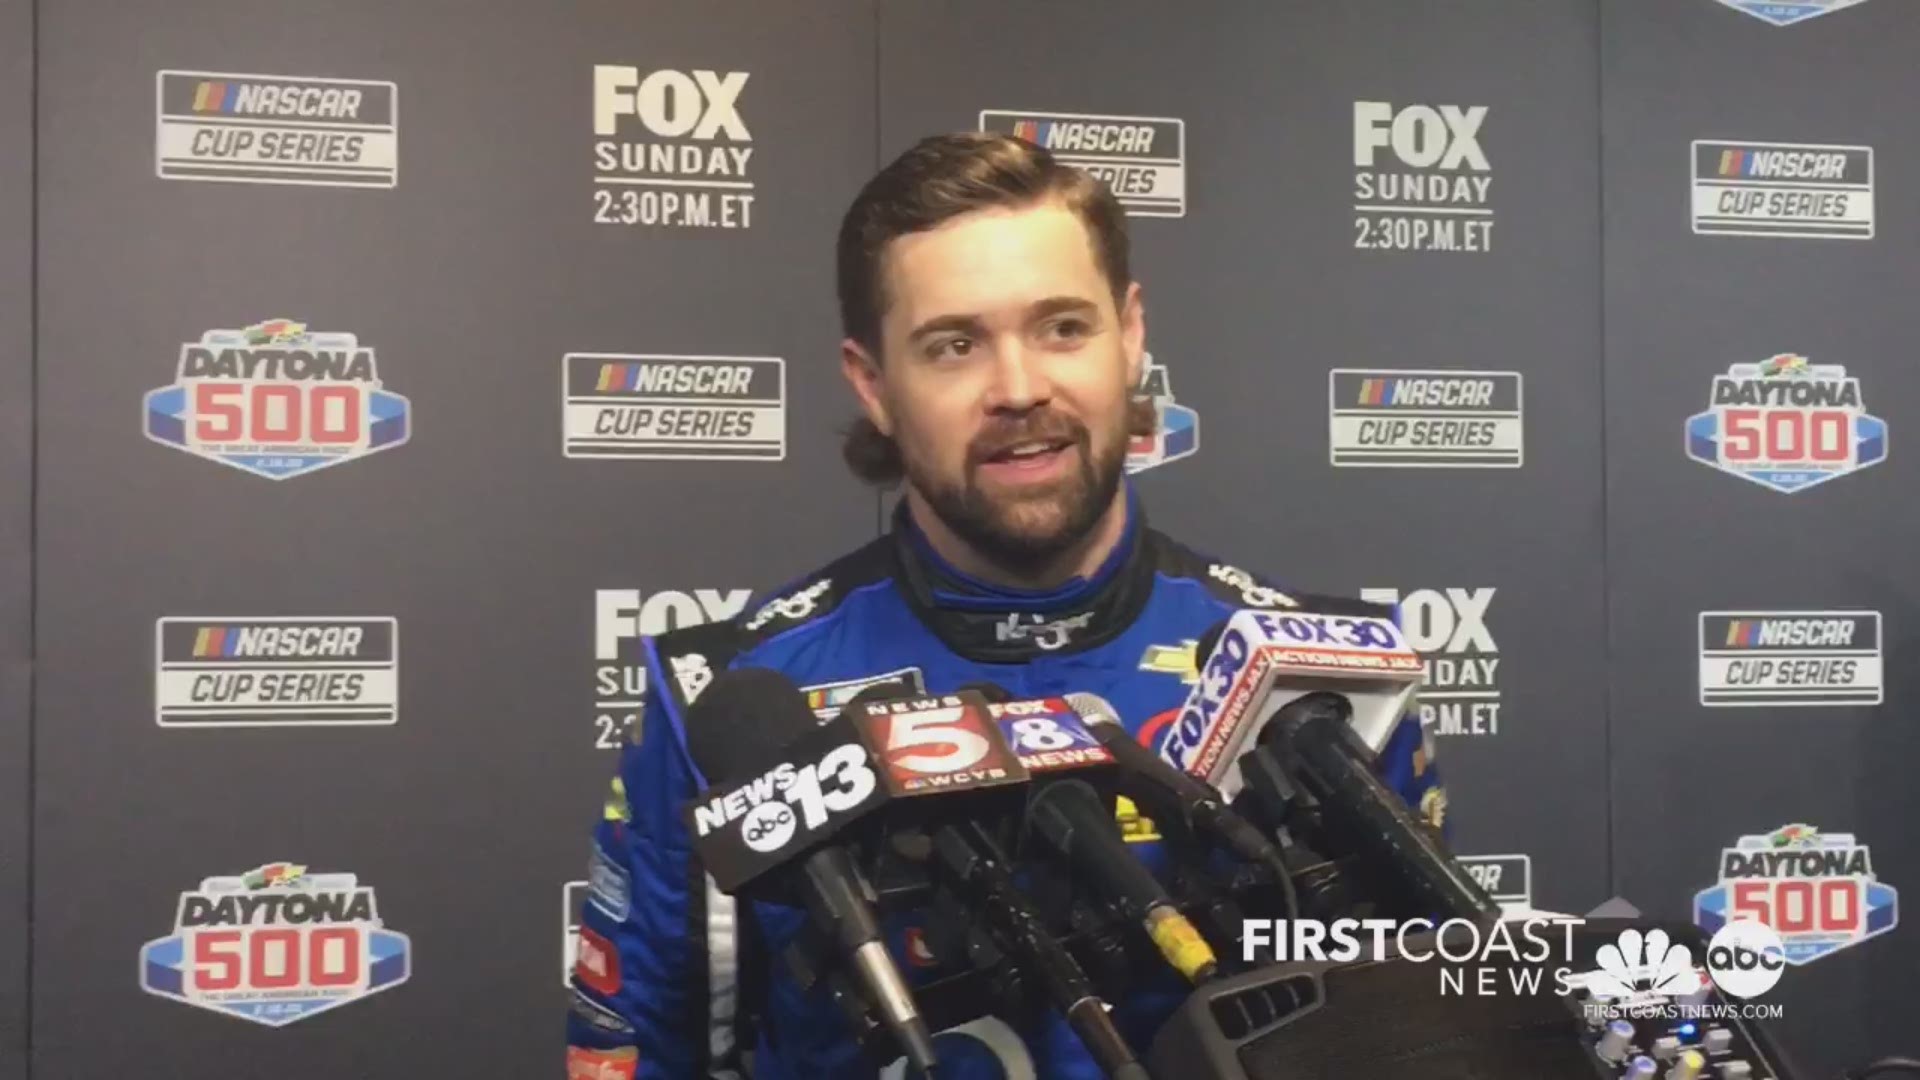 Over the weekend, Ricky Stenhouse Jr claimed his third NASCAR Cup Series pole and first at Daytona. At Media Day, he recapped the wild few days it has been.